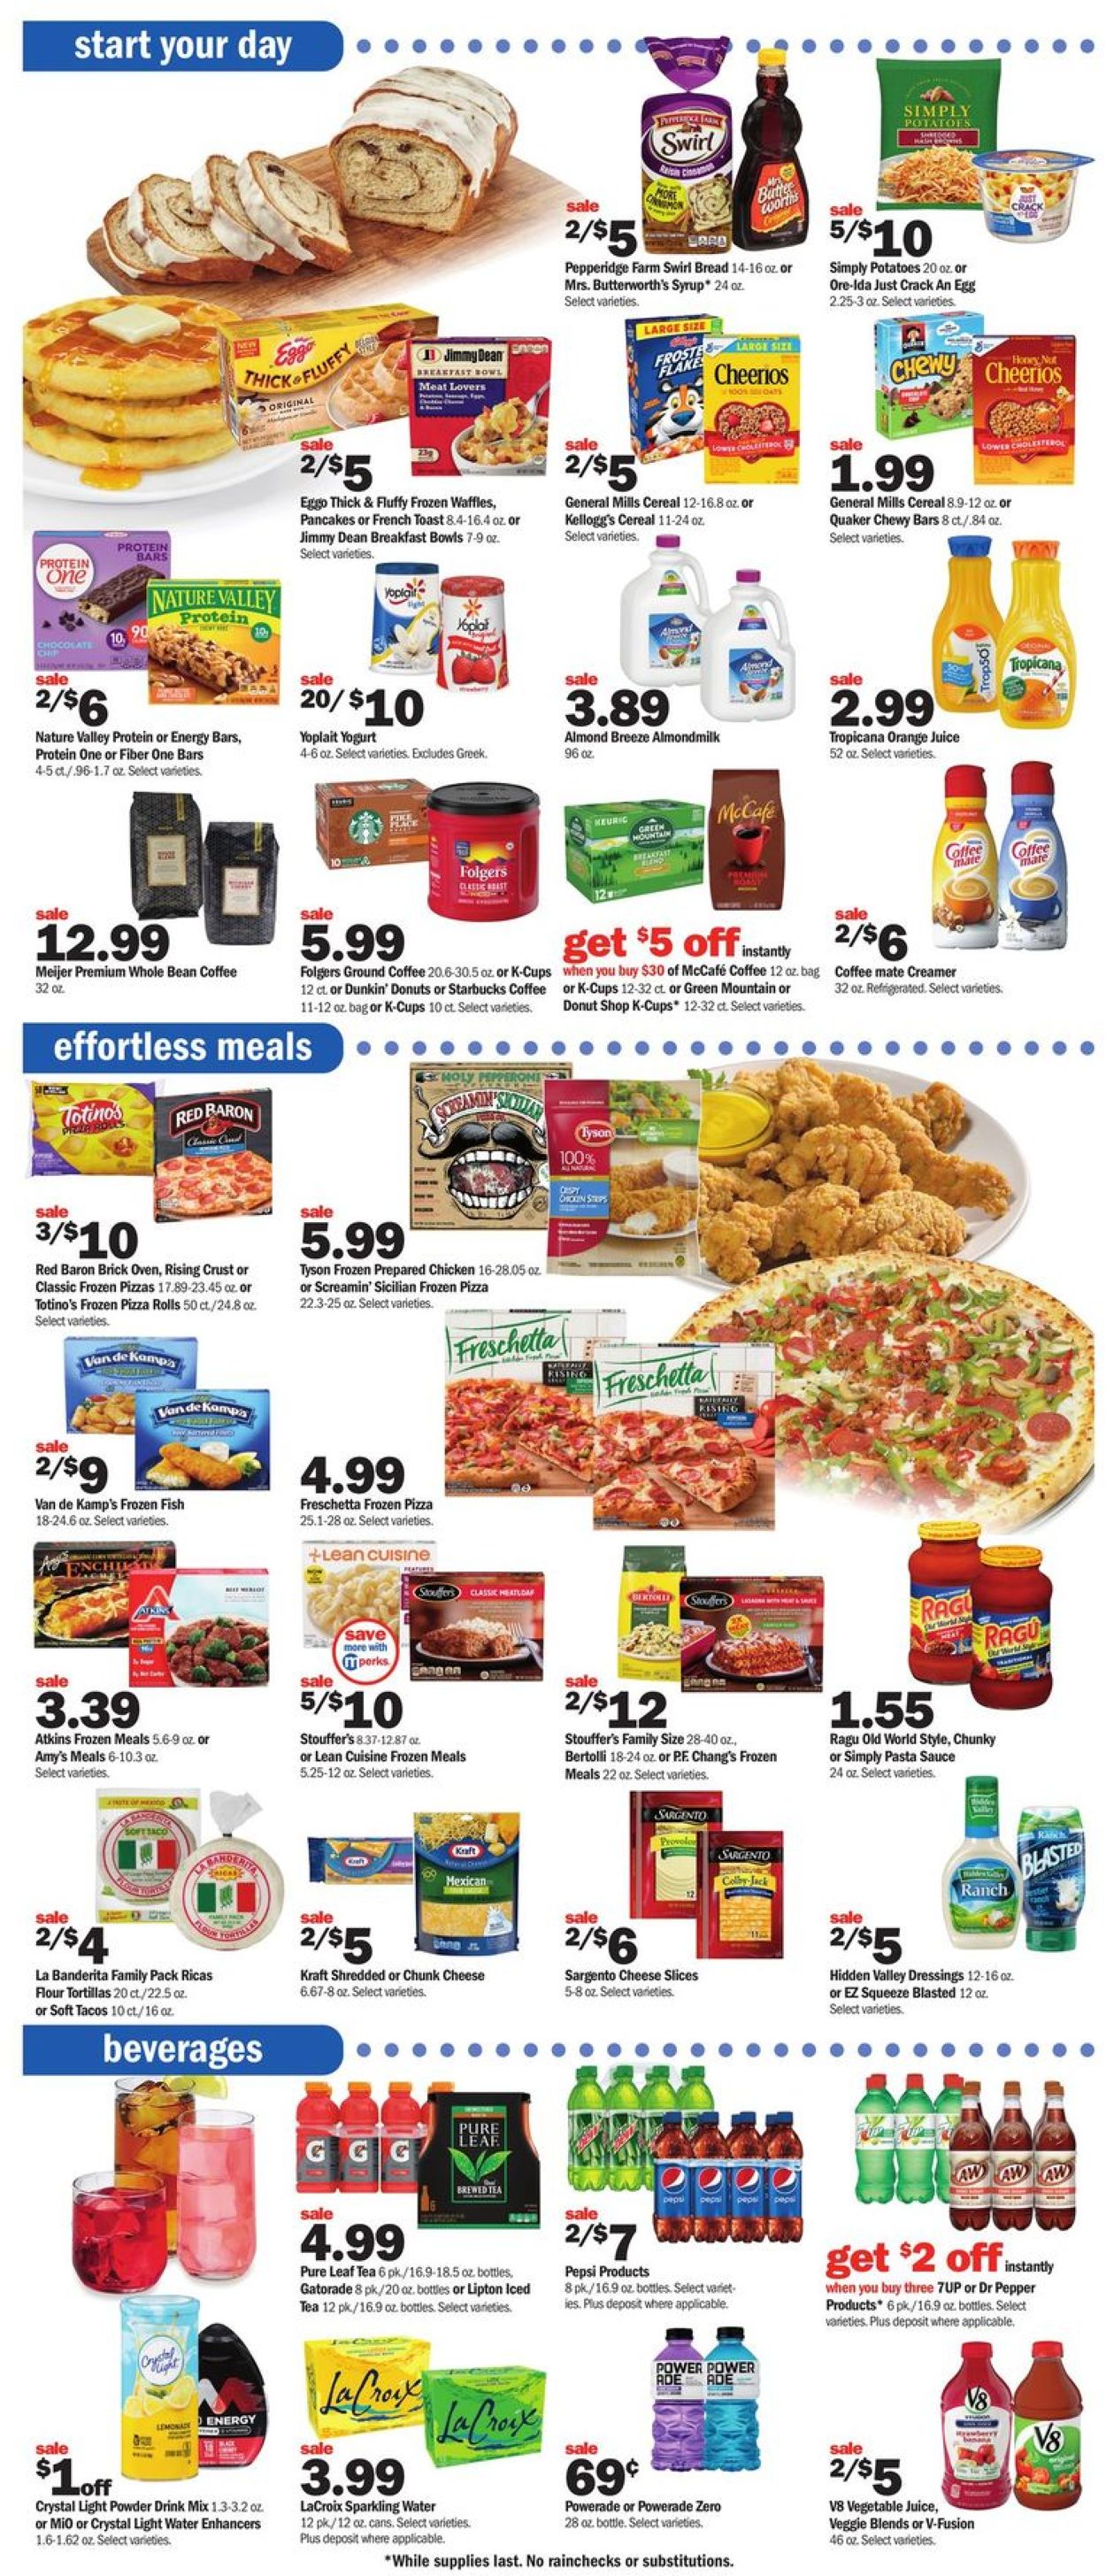 Meijer - Easter 2021 ad Weekly Ad Circular - valid 03/28-04/03/2021 (Page 5)